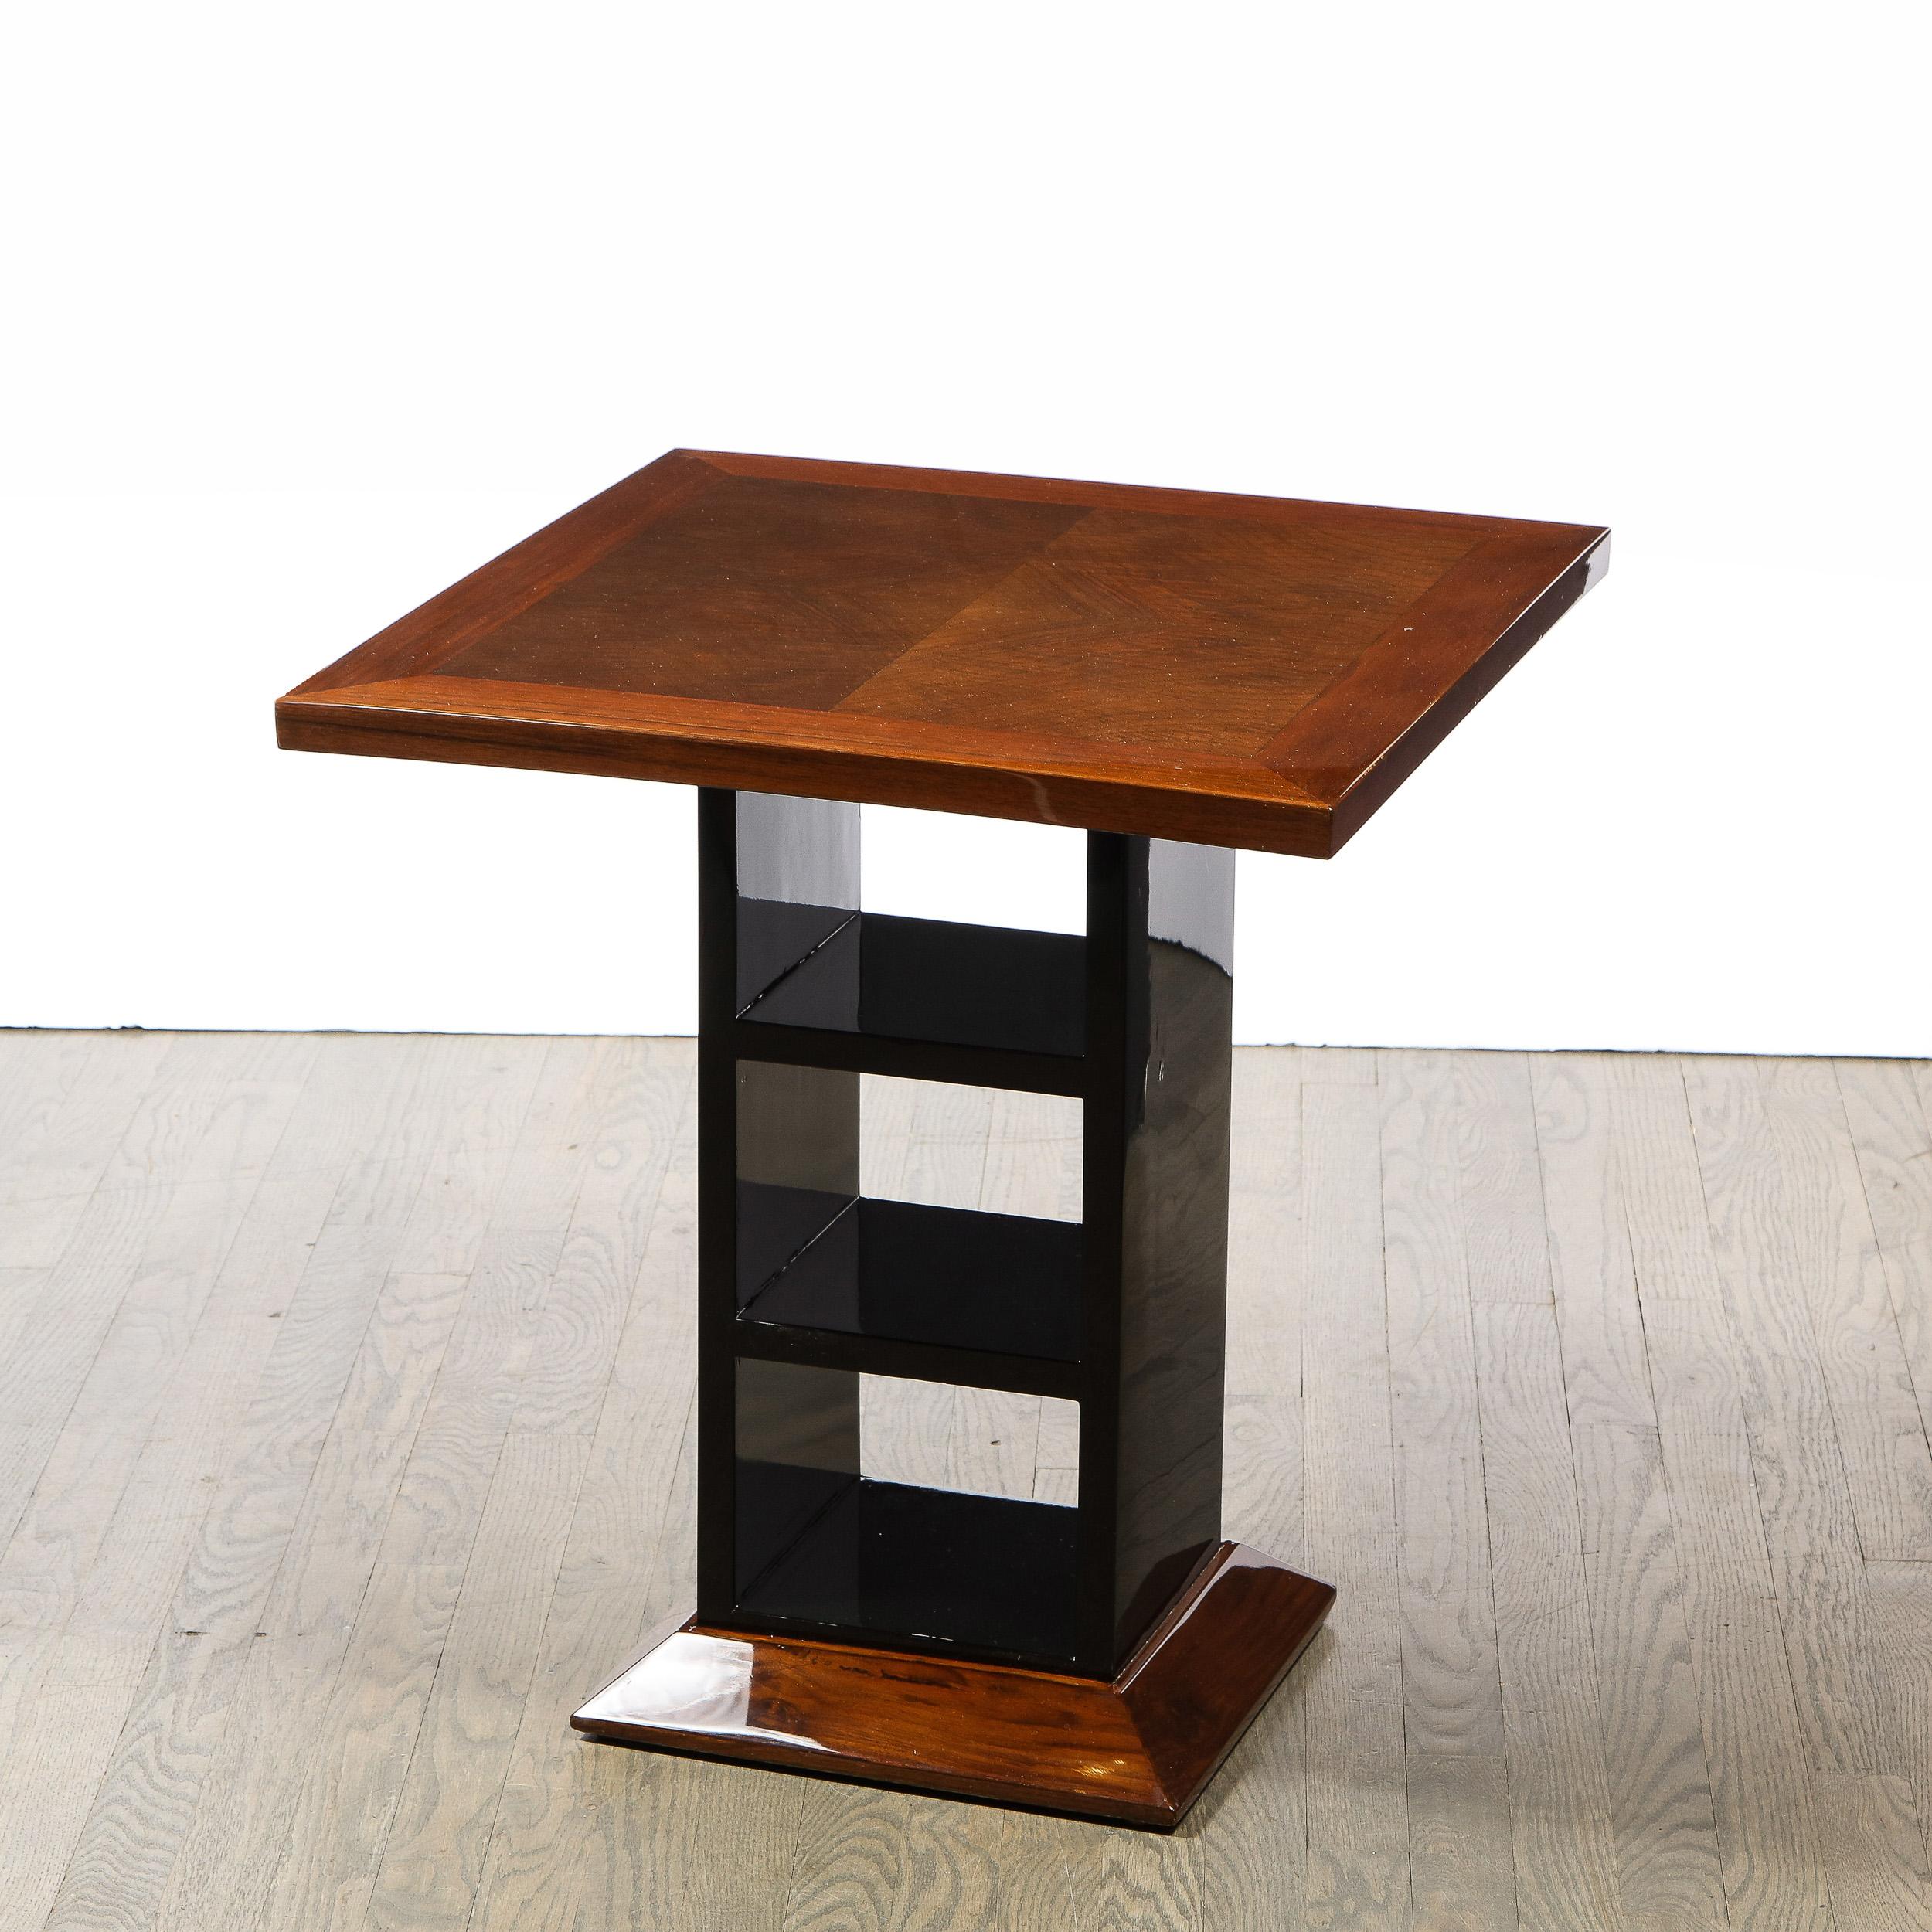 This stunning Art Deco Machine Age side/end table was realized in the United States circa 1935. It features a beveled base; an open form black lacquer body with two perpendicular supports; and a square top in bookmatched walnut. With its graphic